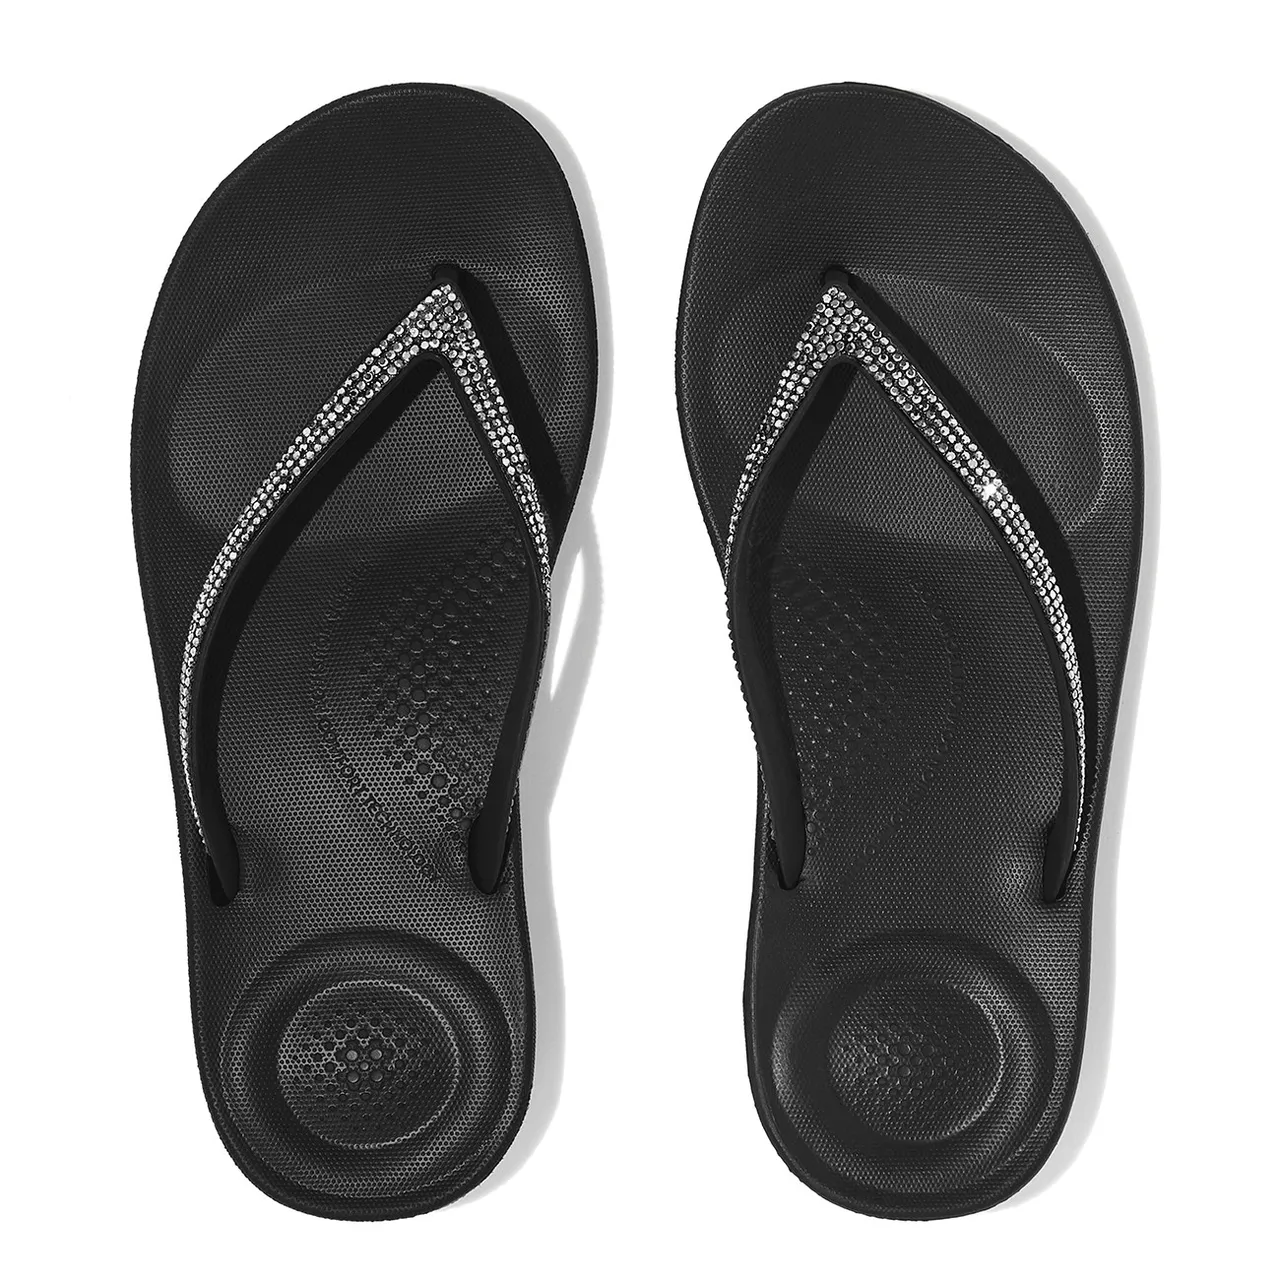 FitFlop Iqushion sparkle tpu